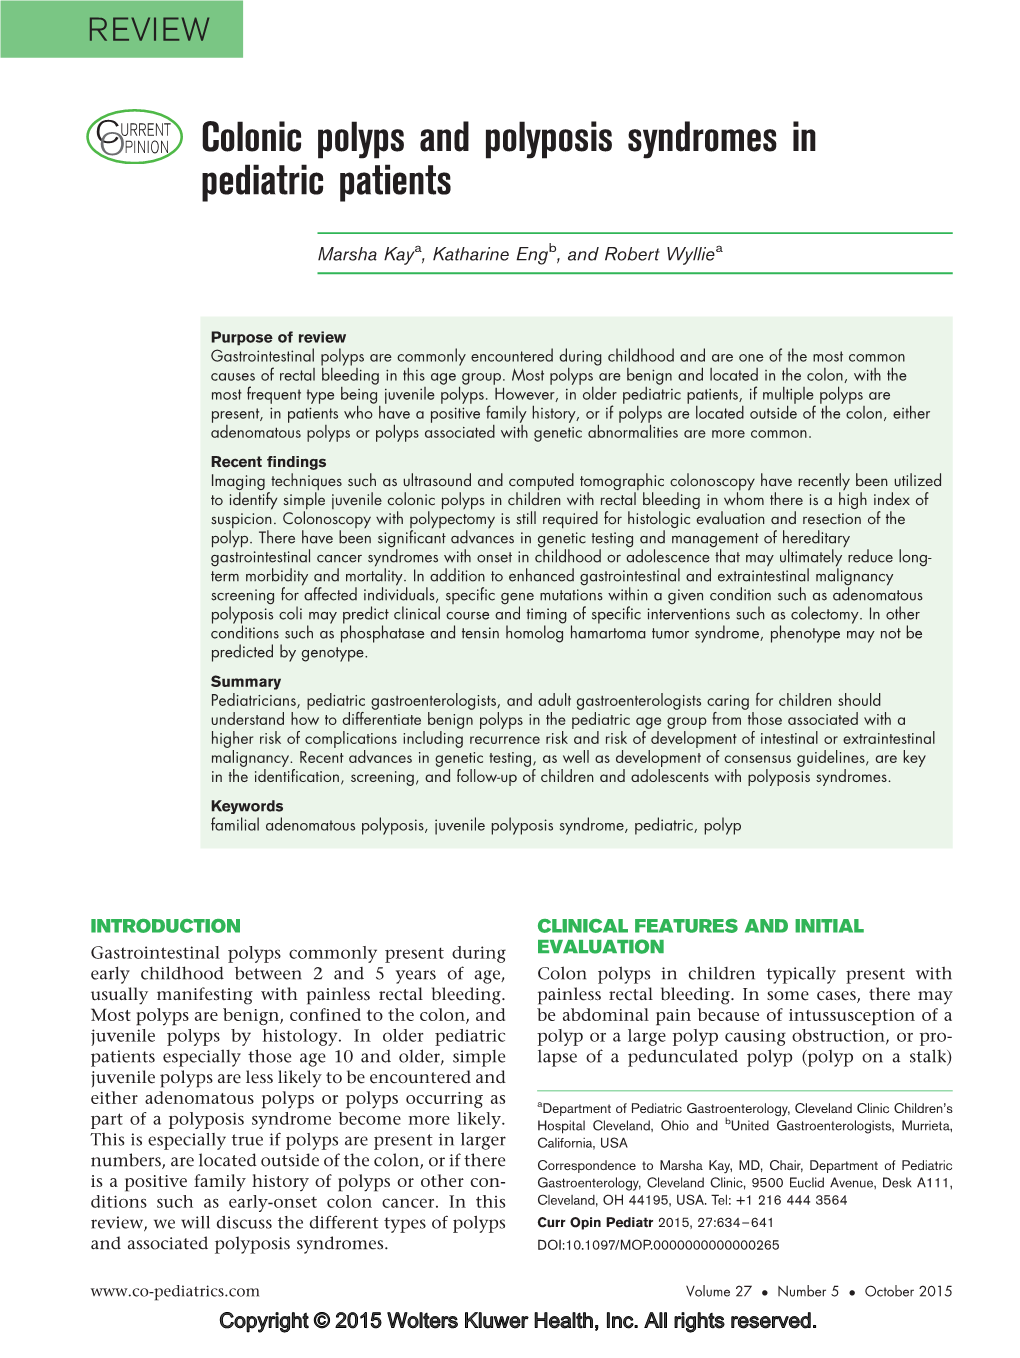 Colonic Polyps and Polyposis Syndromes in Pediatric Patients